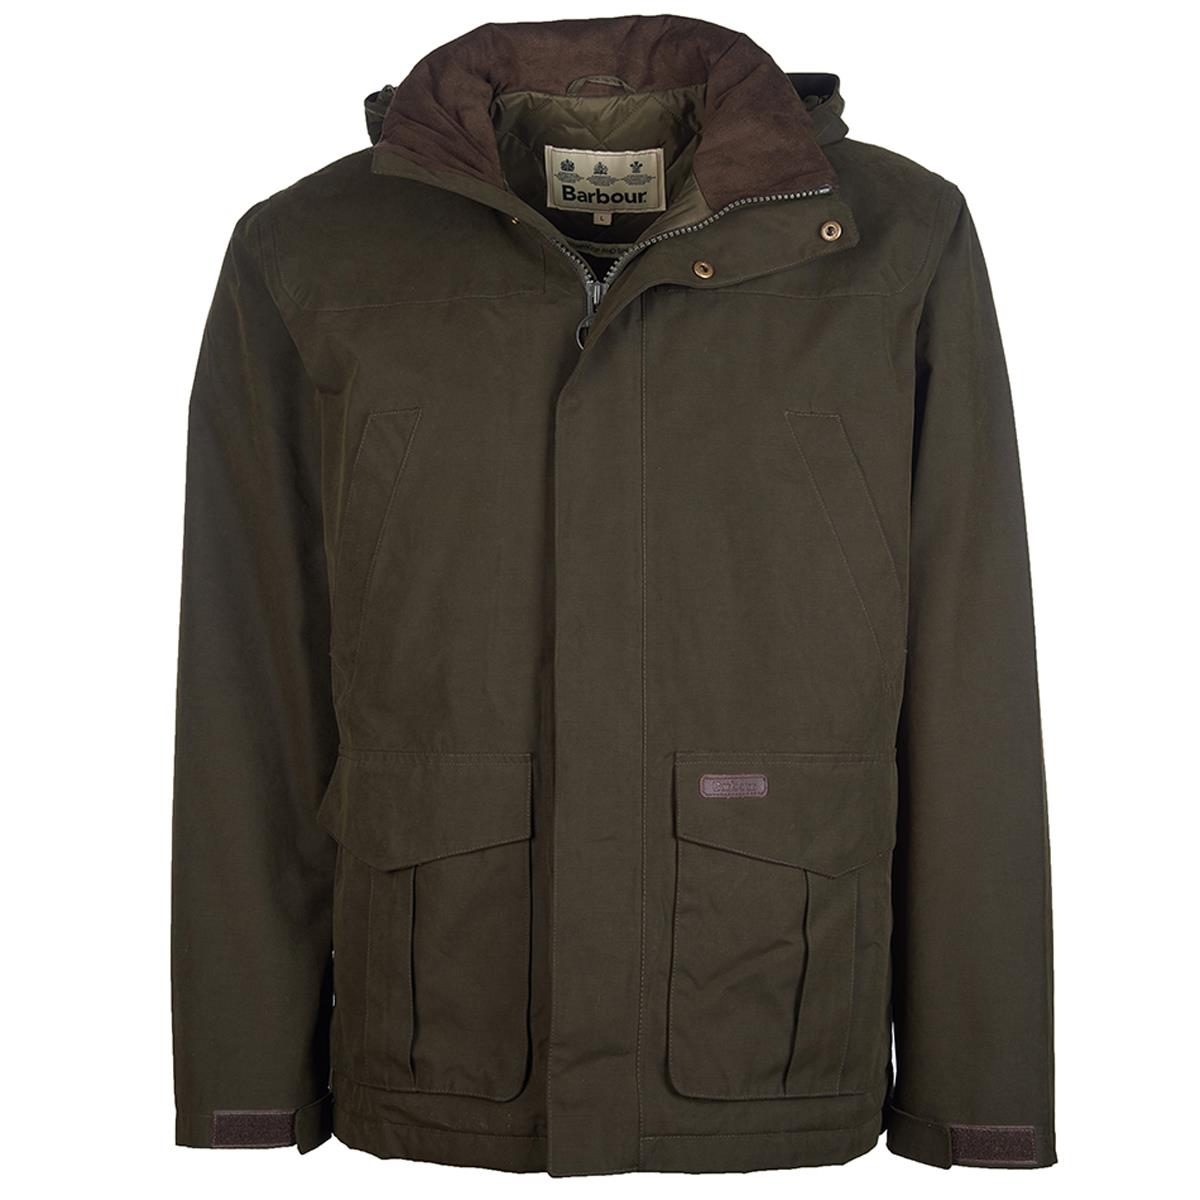 What is the Barbour Brockstone Jacket and its features?